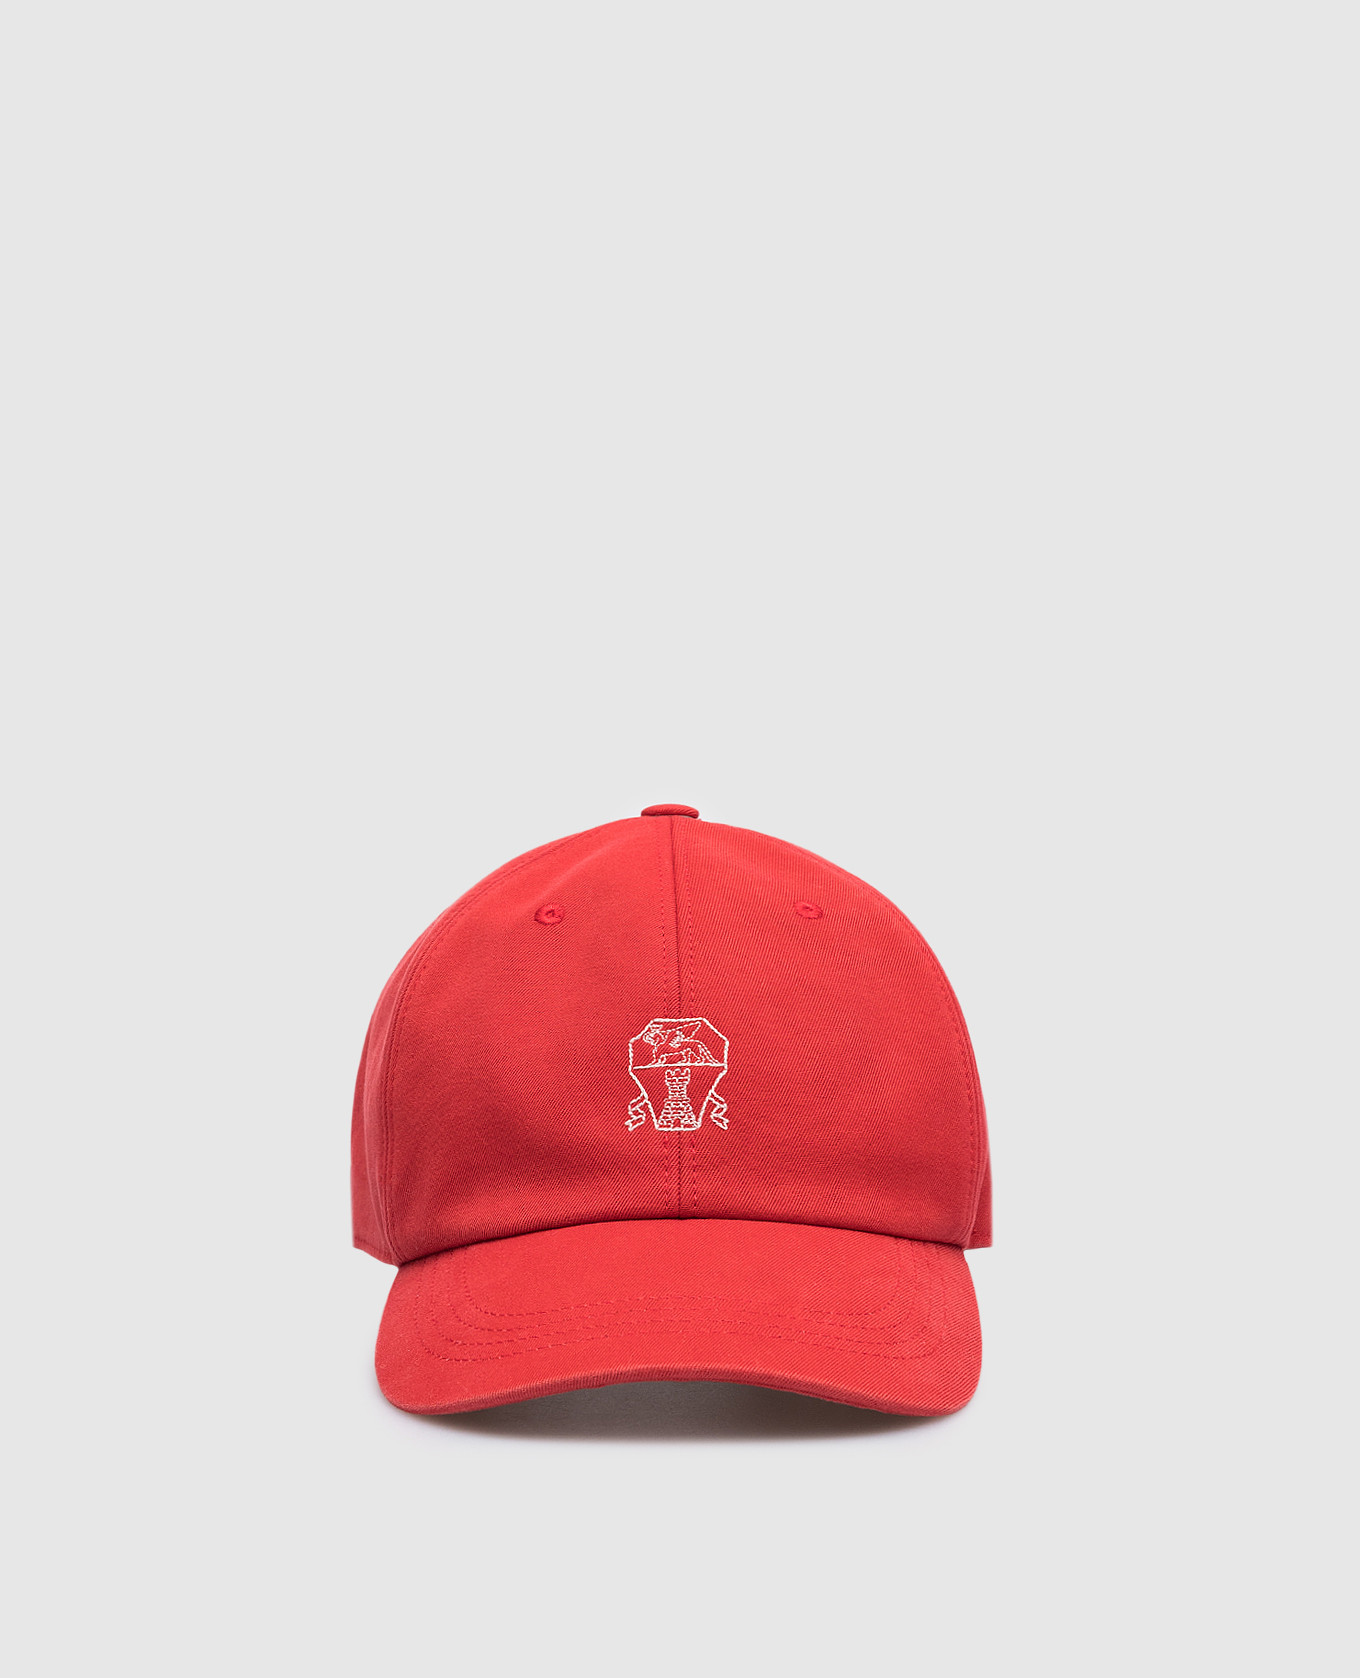 Red cap with logo embroidery